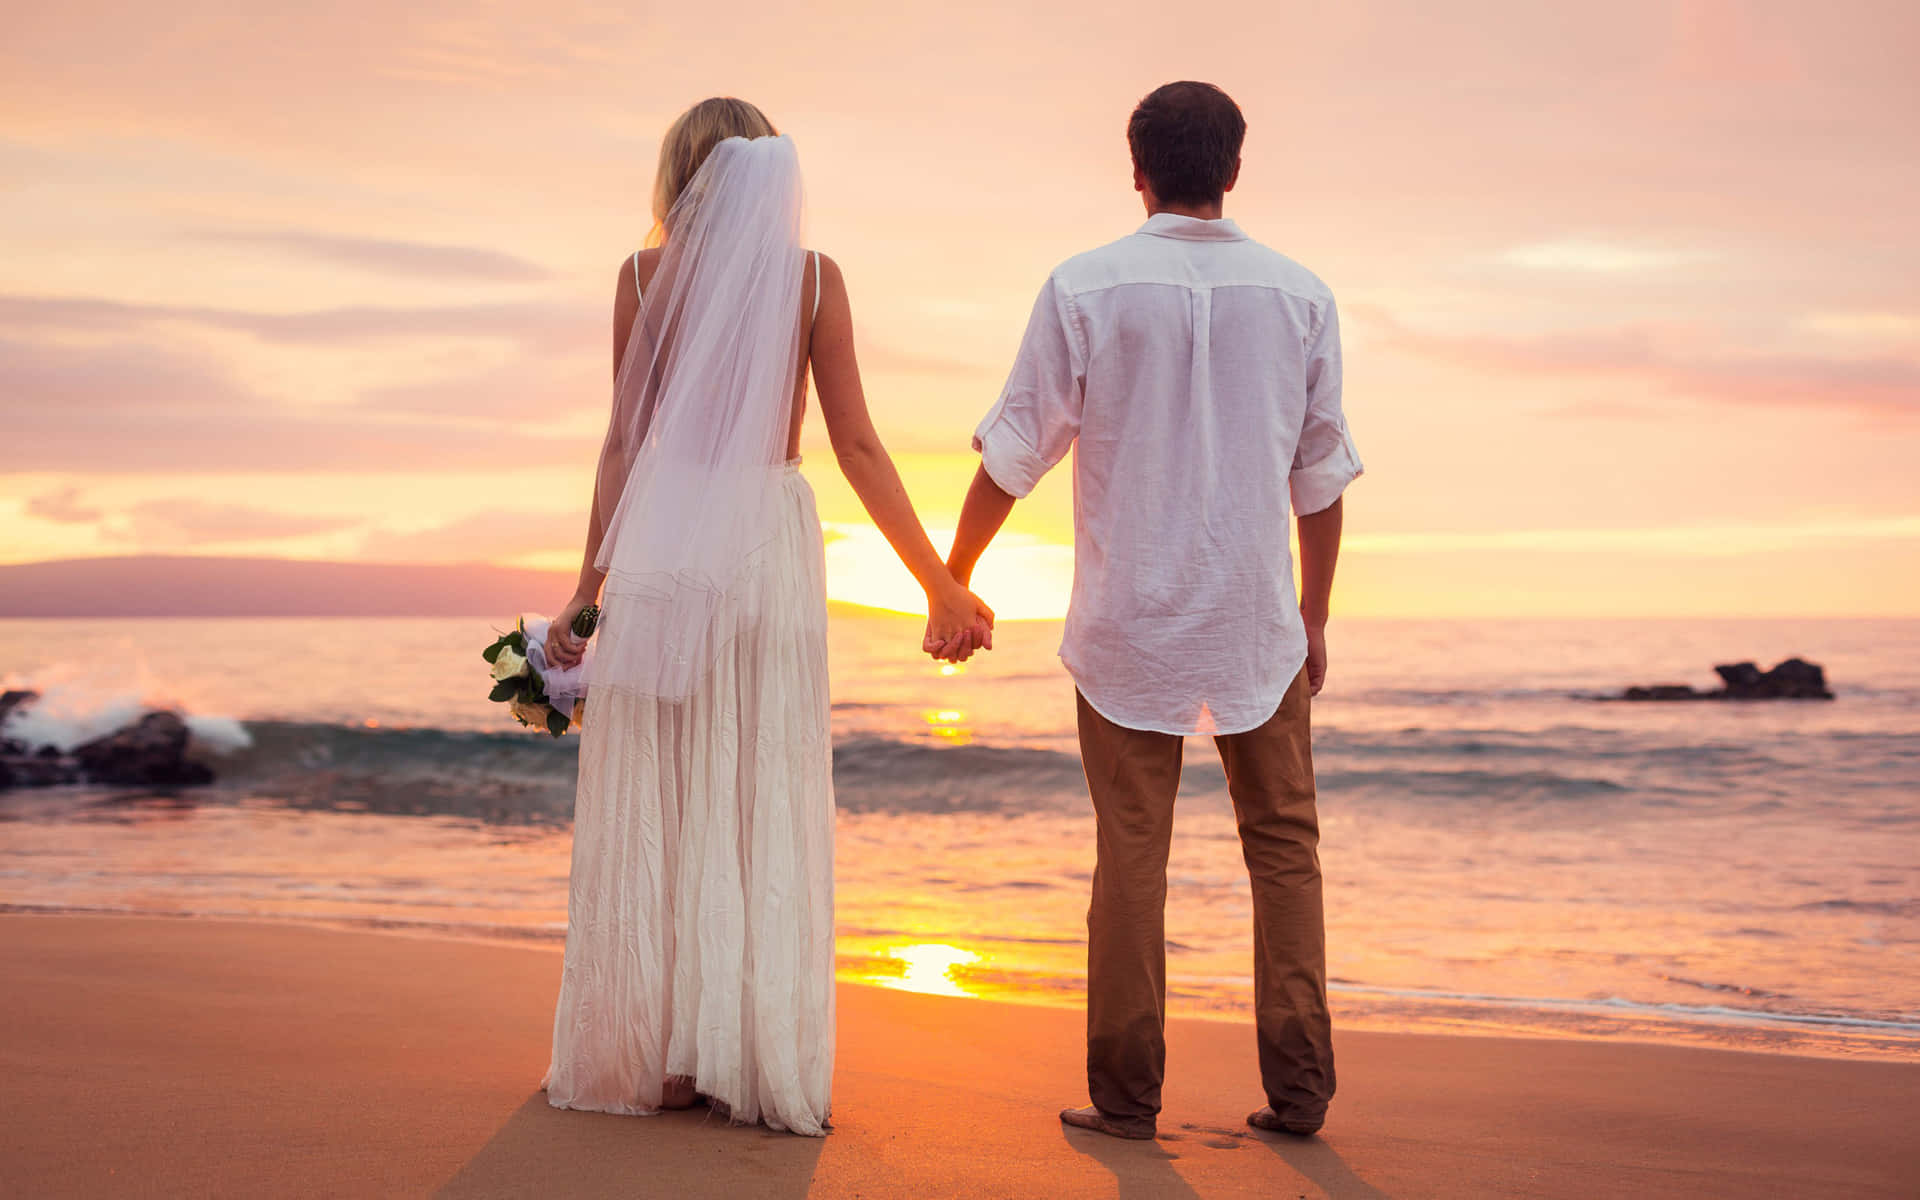 Sunset Husband And Wife On Beach Pictures